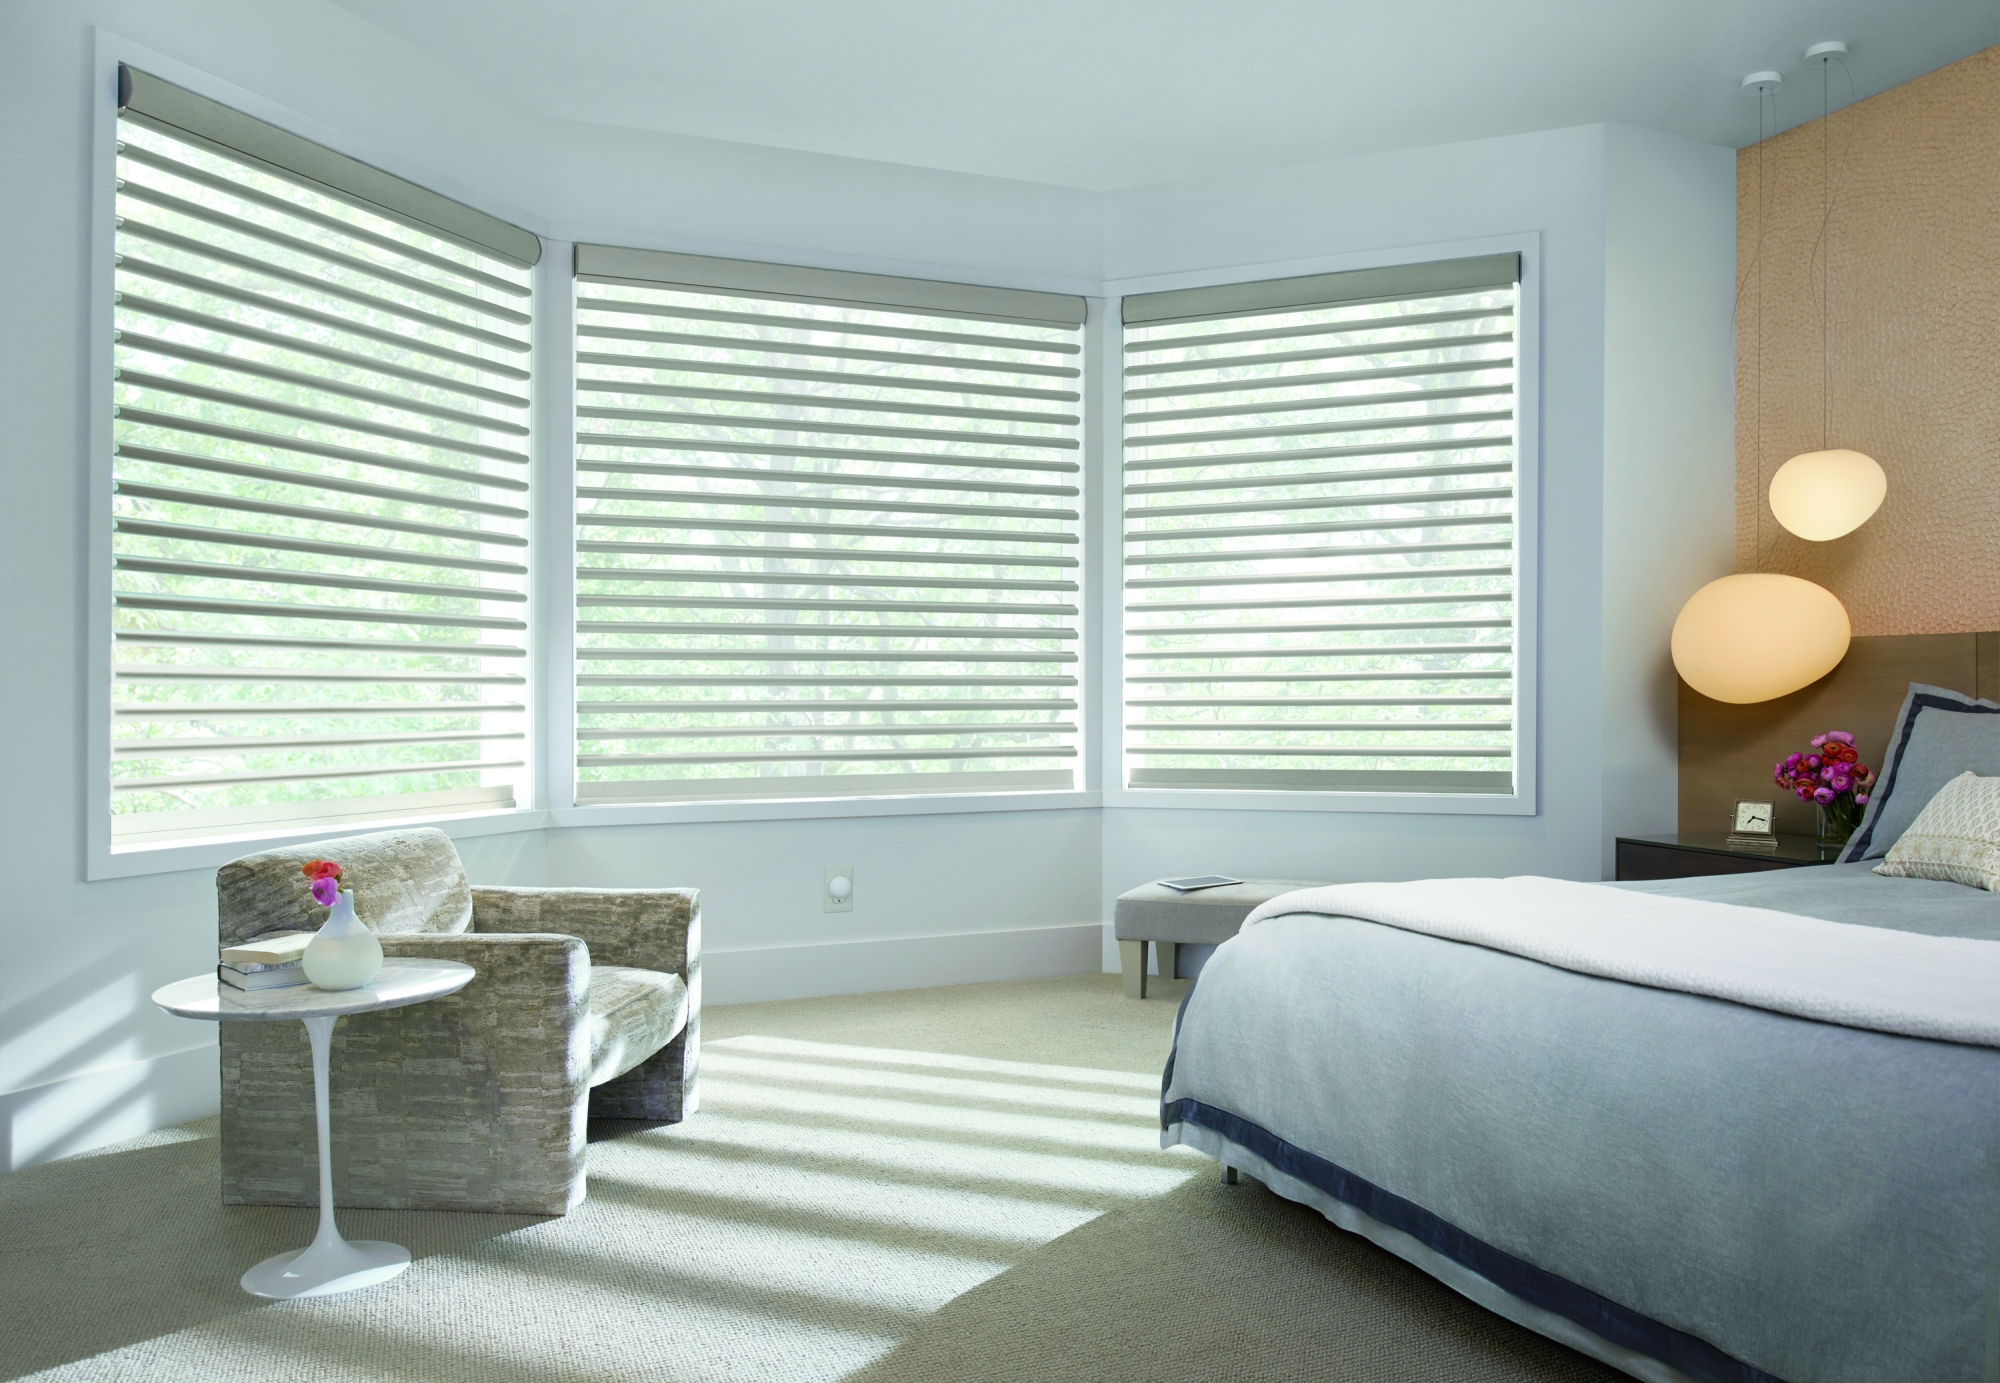 Welltech Trends Defining the Healthy Home. Image: Hunter Douglas  